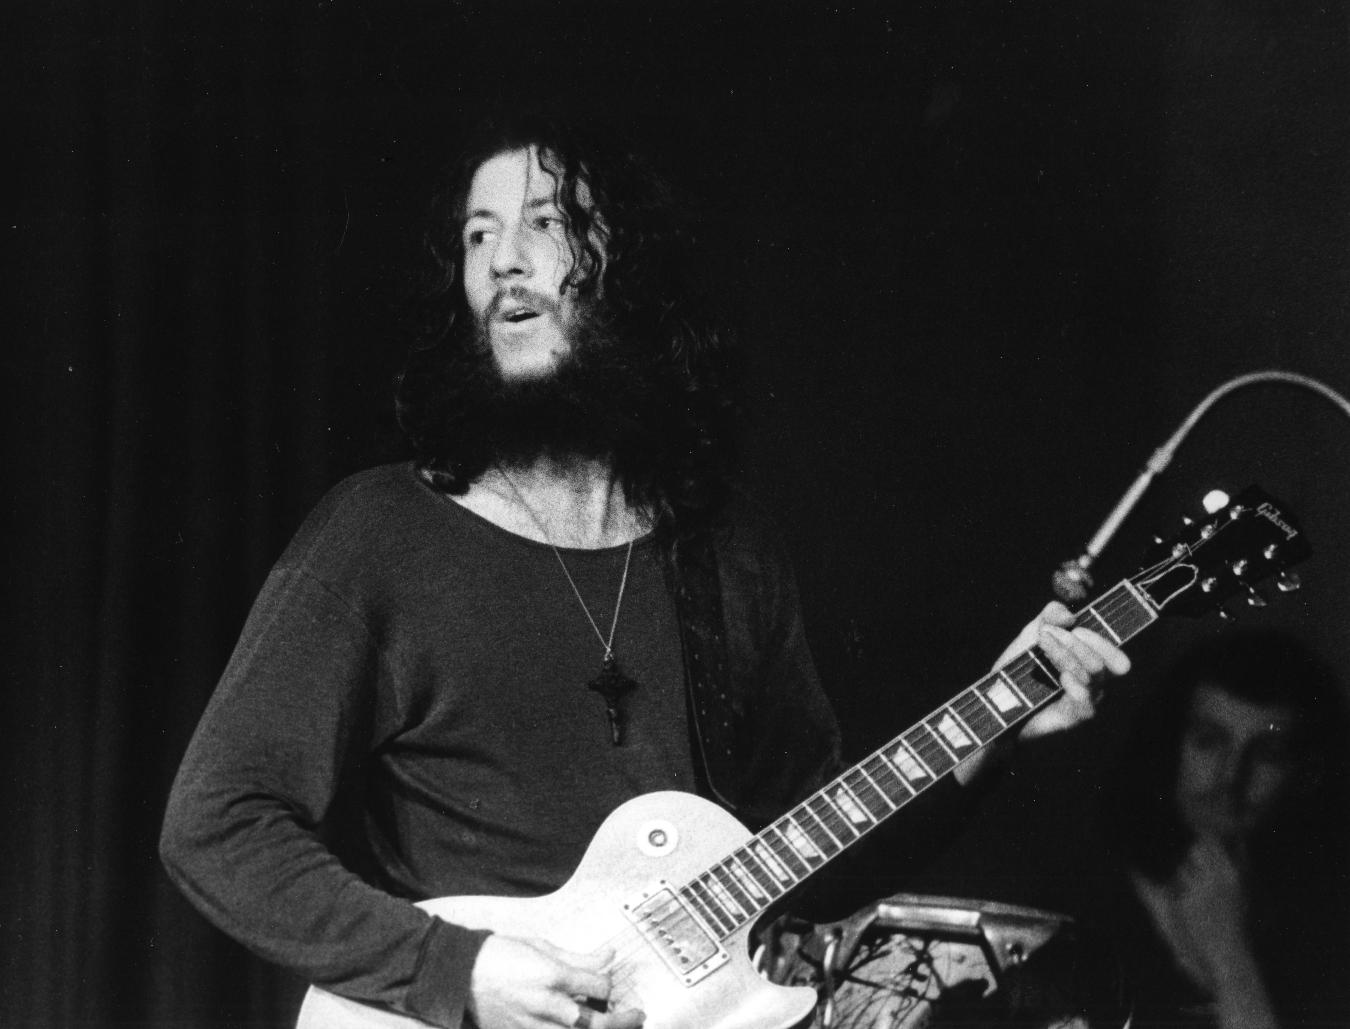 Happy 69th birthday to the great blues guitarist Peter Green today! 